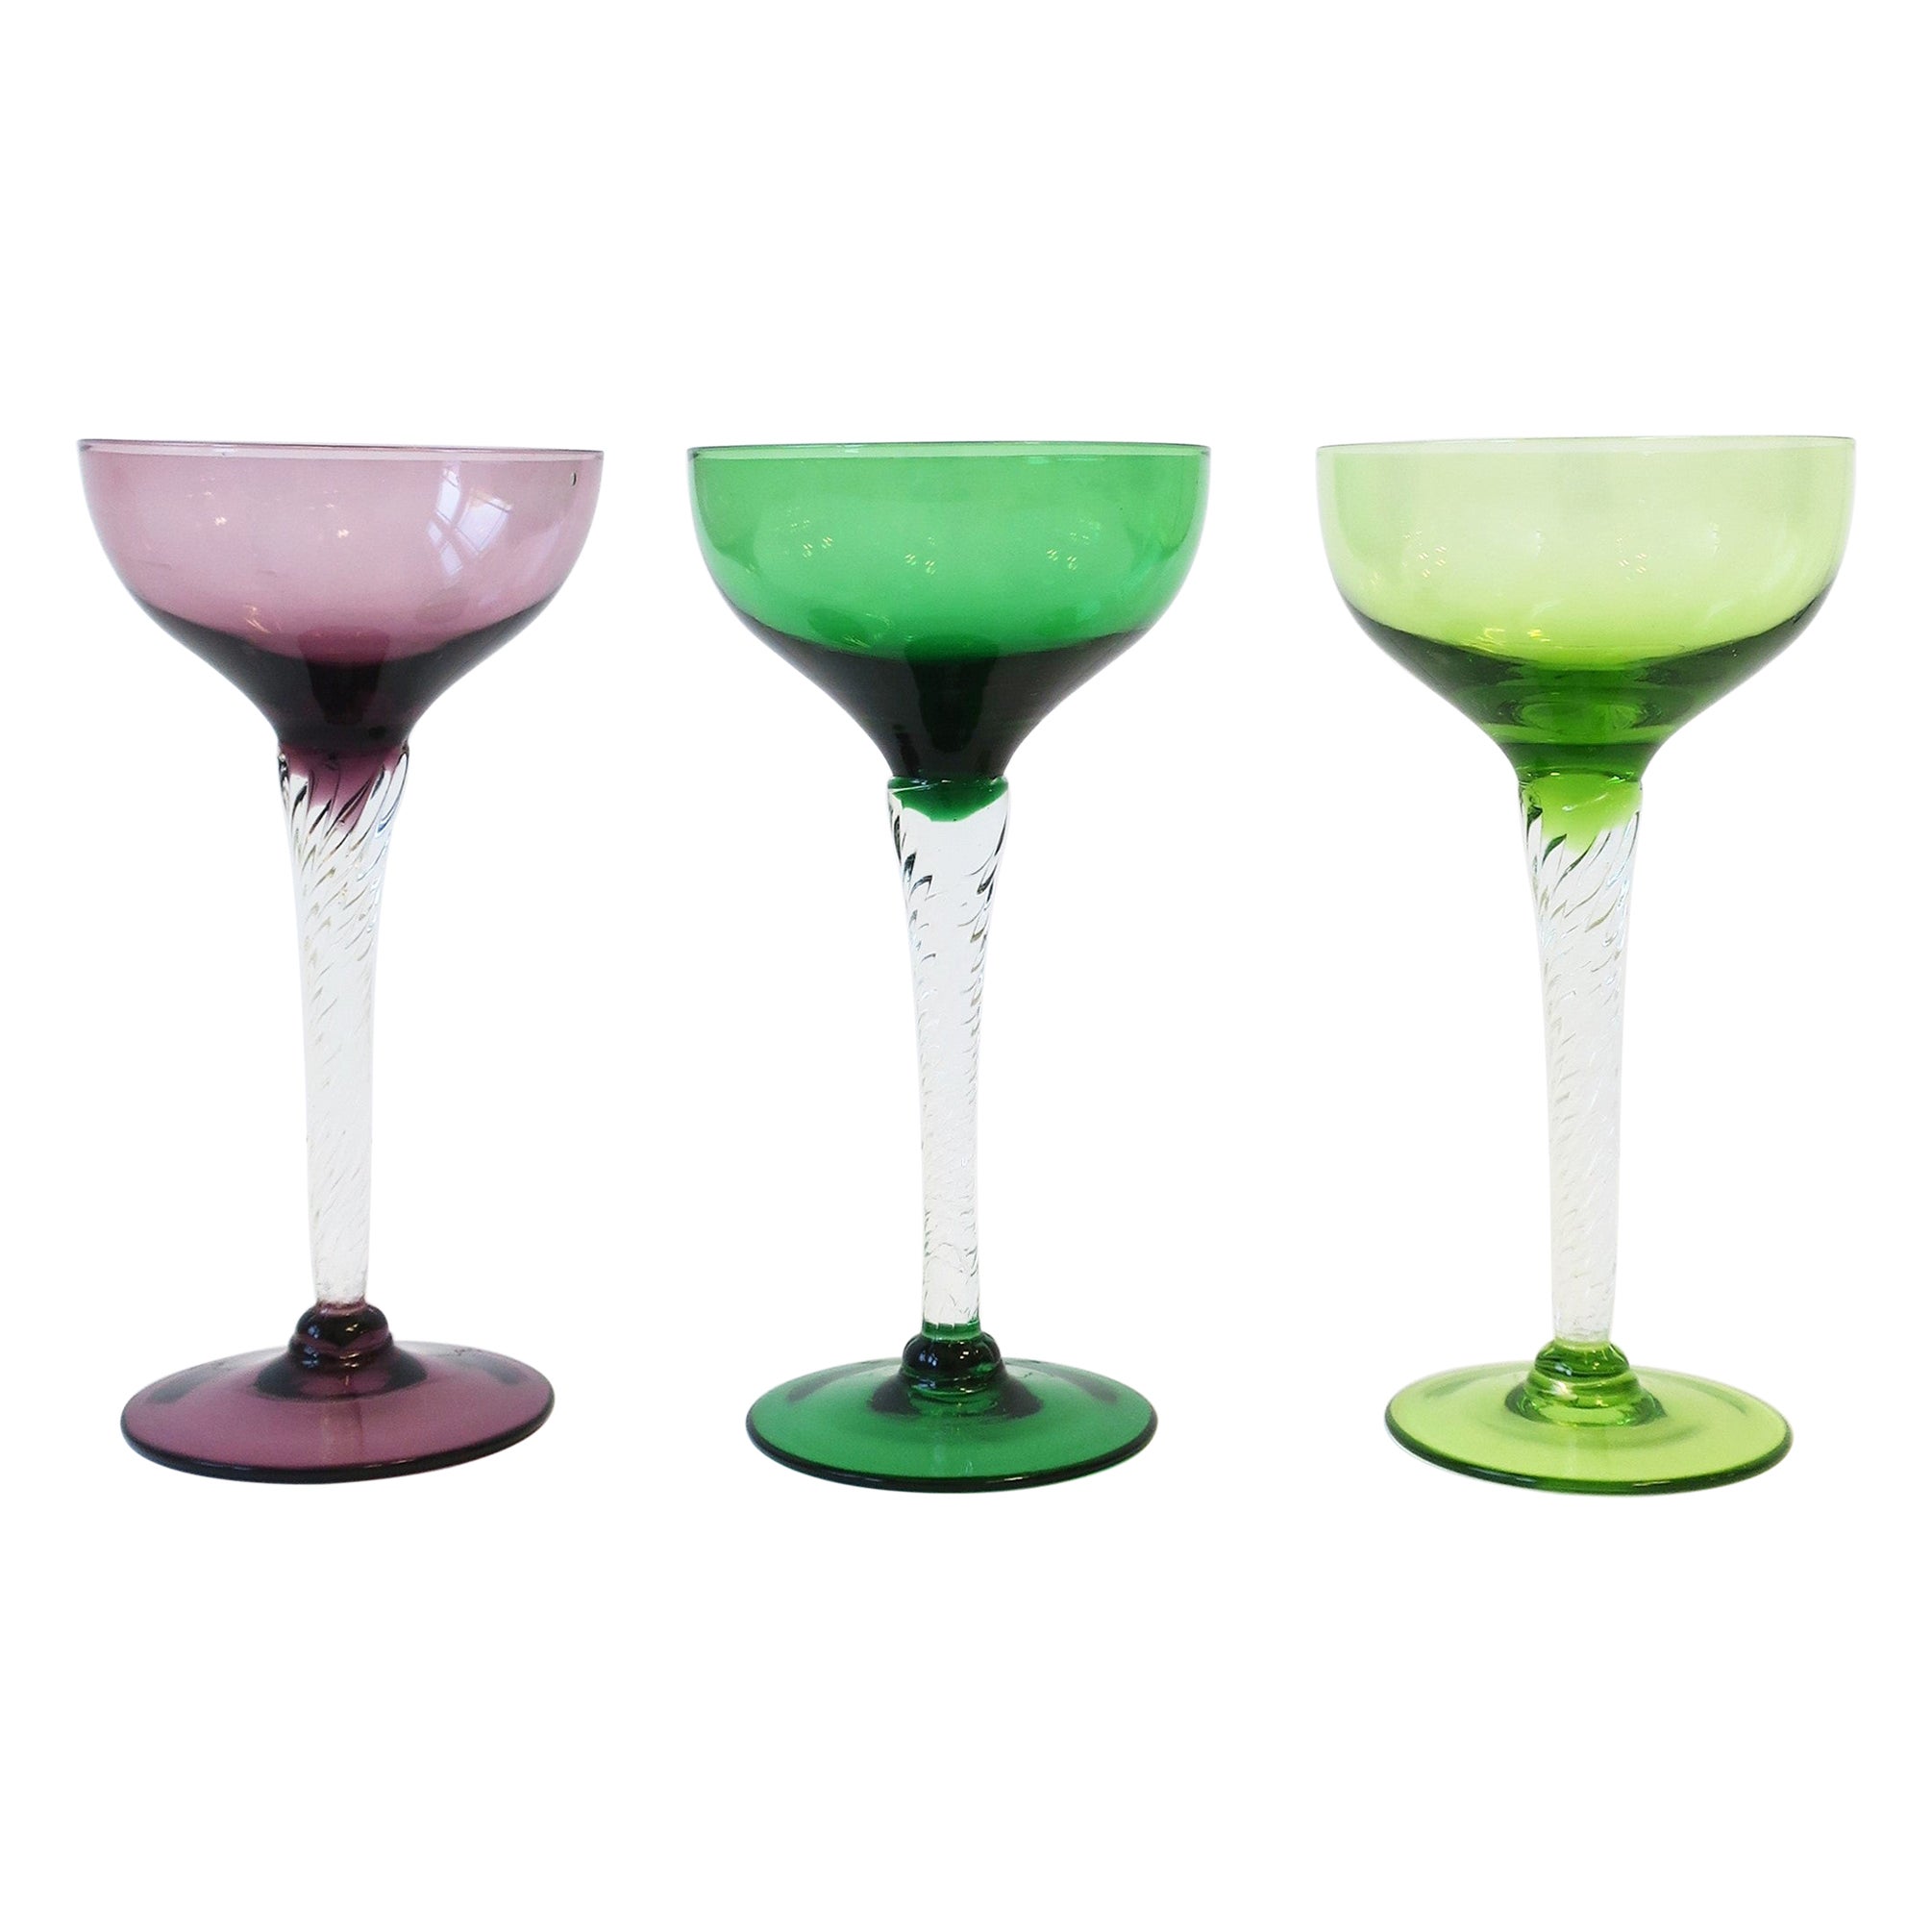 Vintage Barware Colorful Art Glass Cocktail or Champagne Coupe Glasses, Set of 3